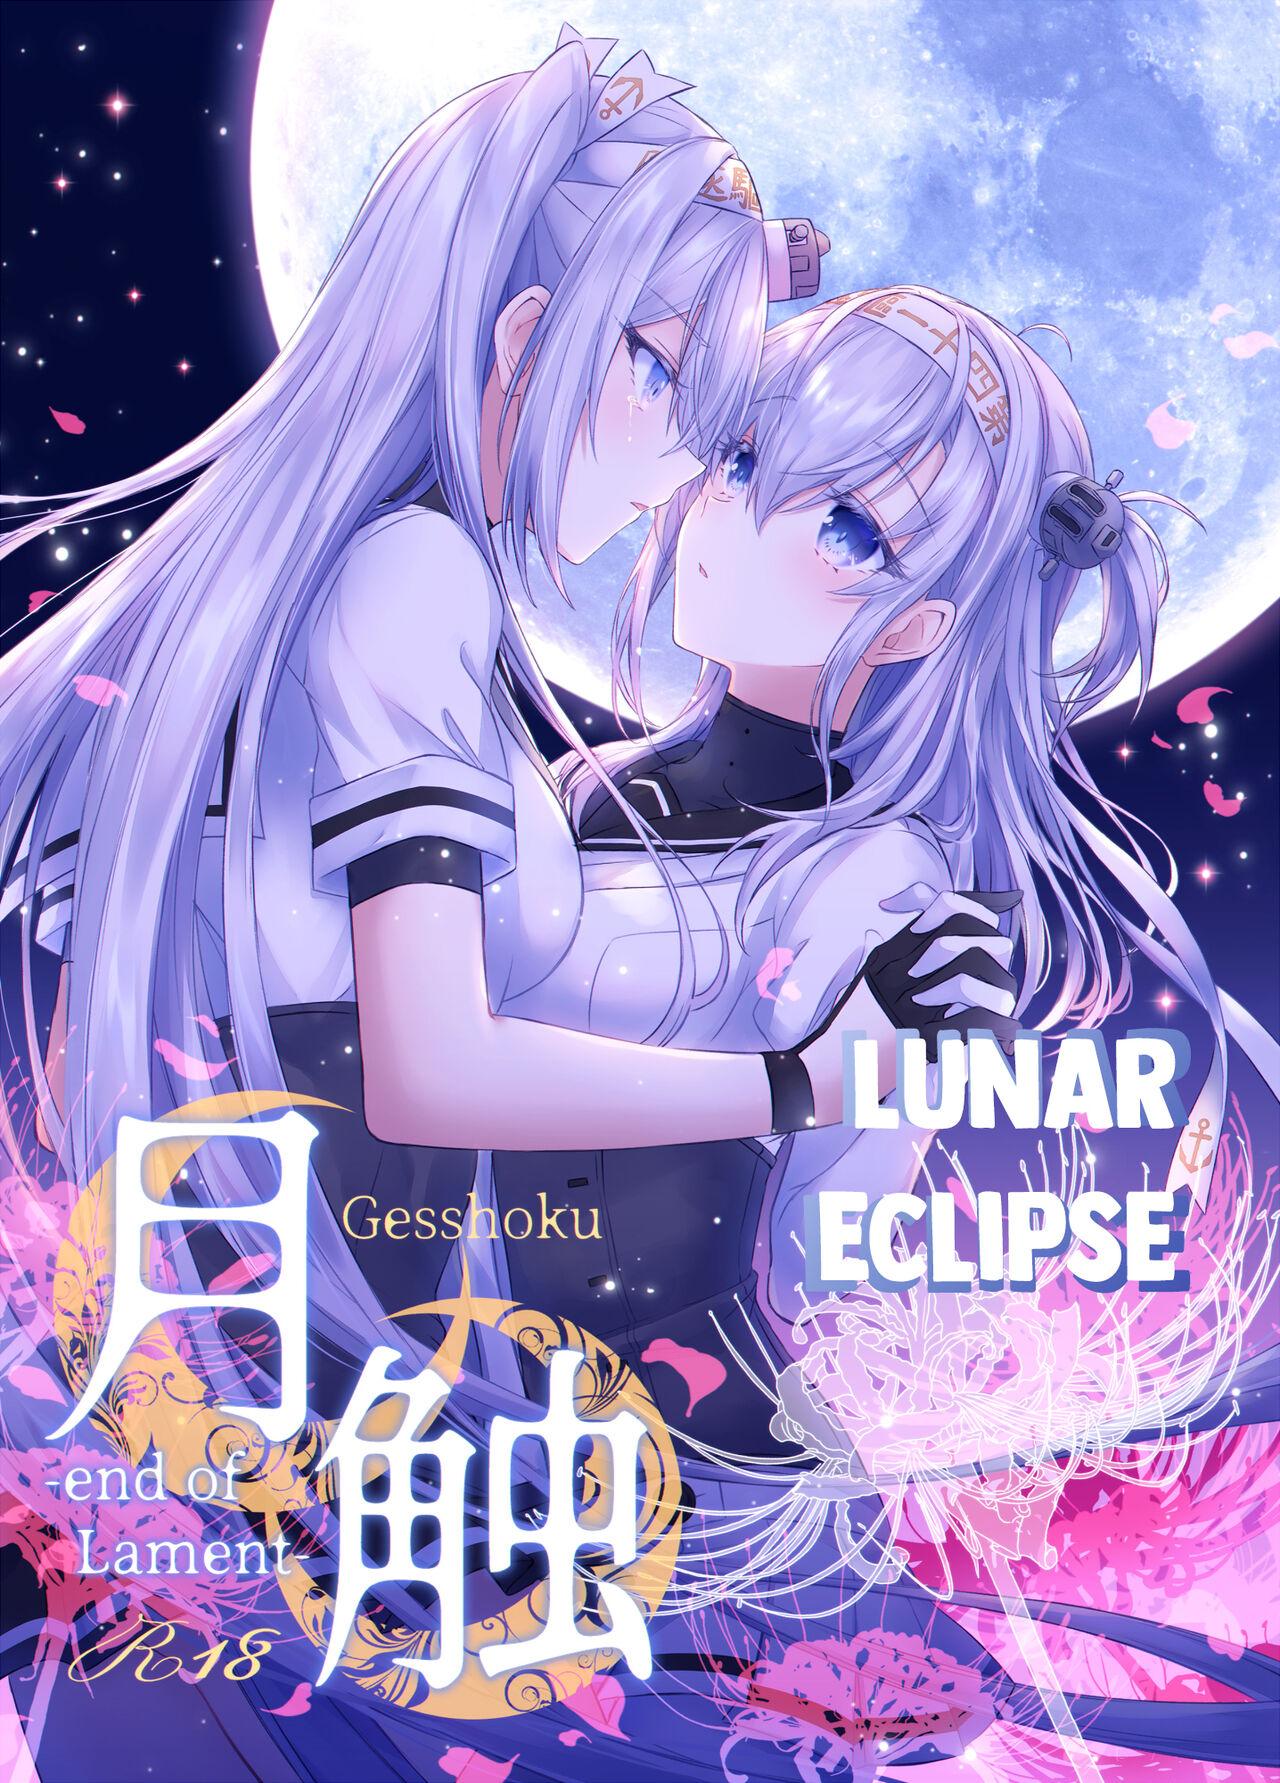 [my pace world (Kabocha Torte)] Gesshoku -end of Lament- | Lunar Eclipse -end of Lament- (Kantai Collection -KanColle-) [English] [Digital] 0